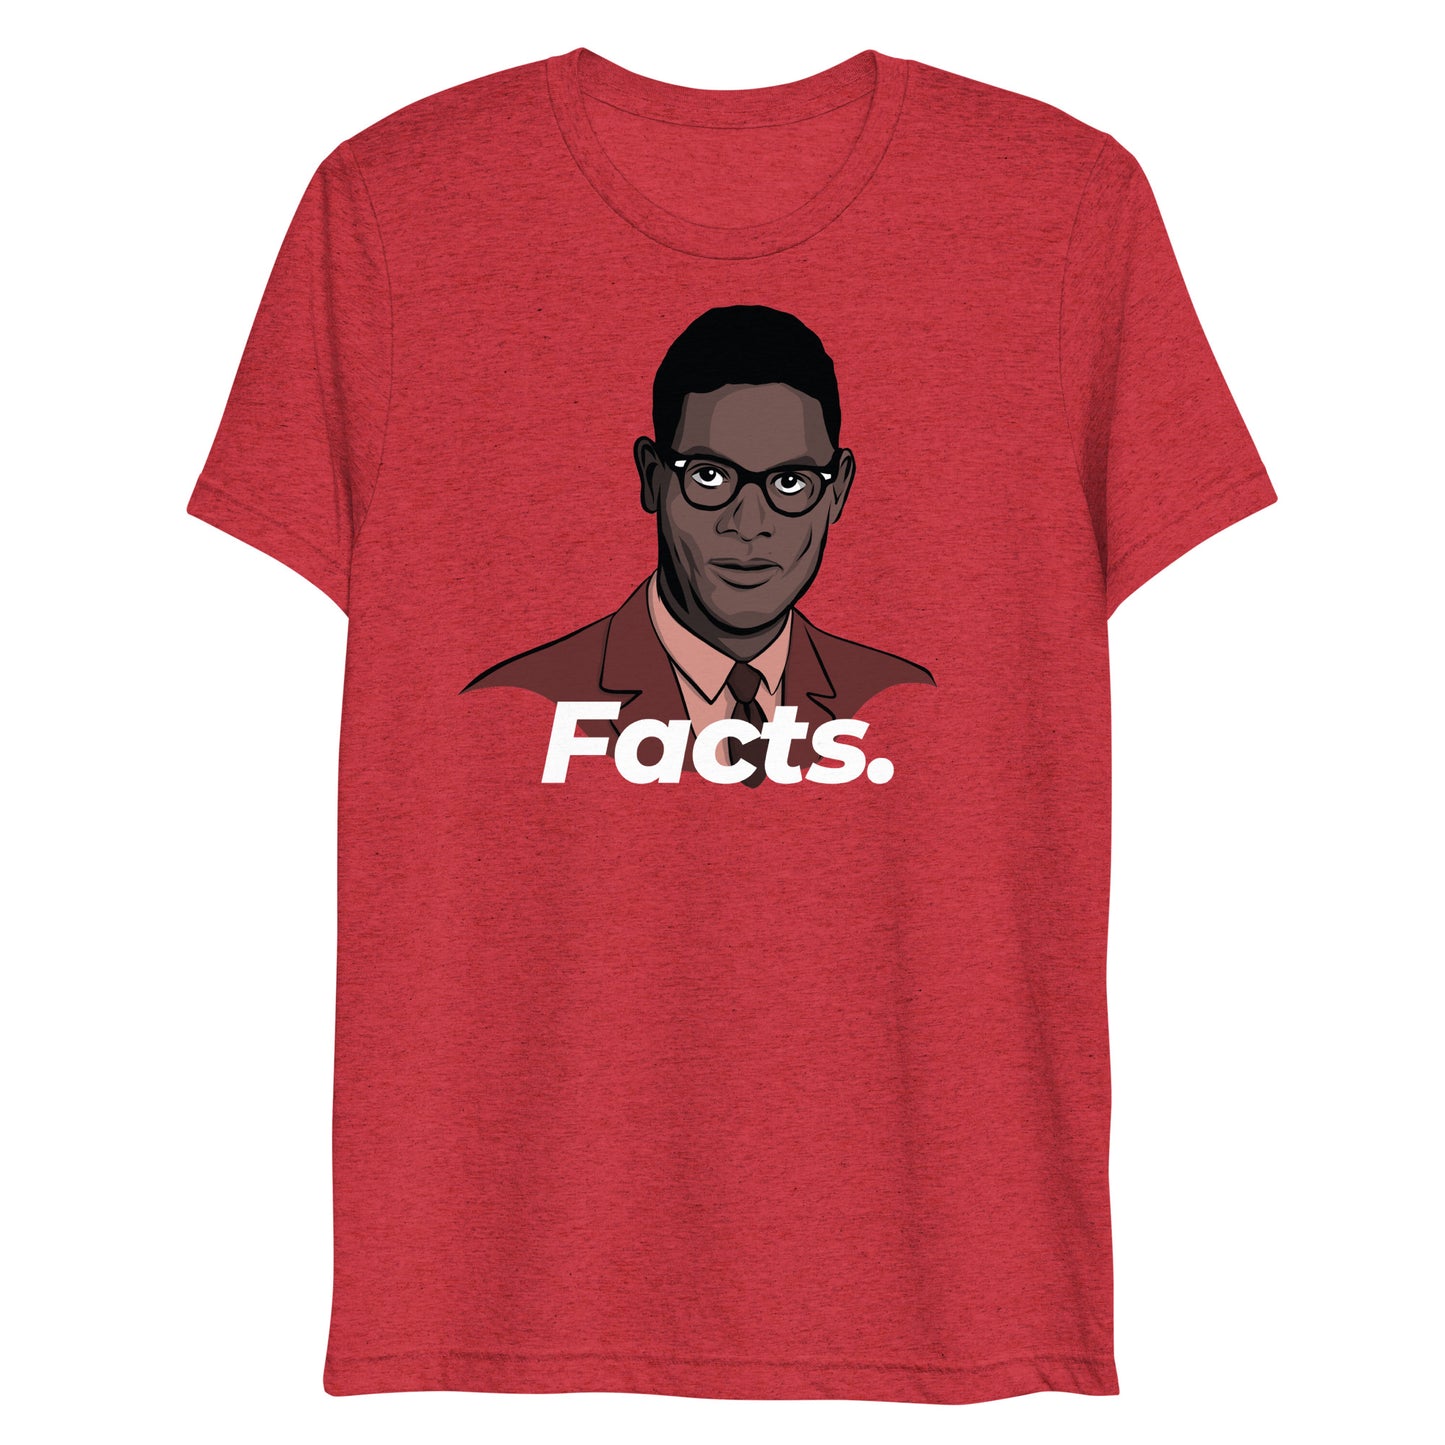 Facts. Sowell T-shirt